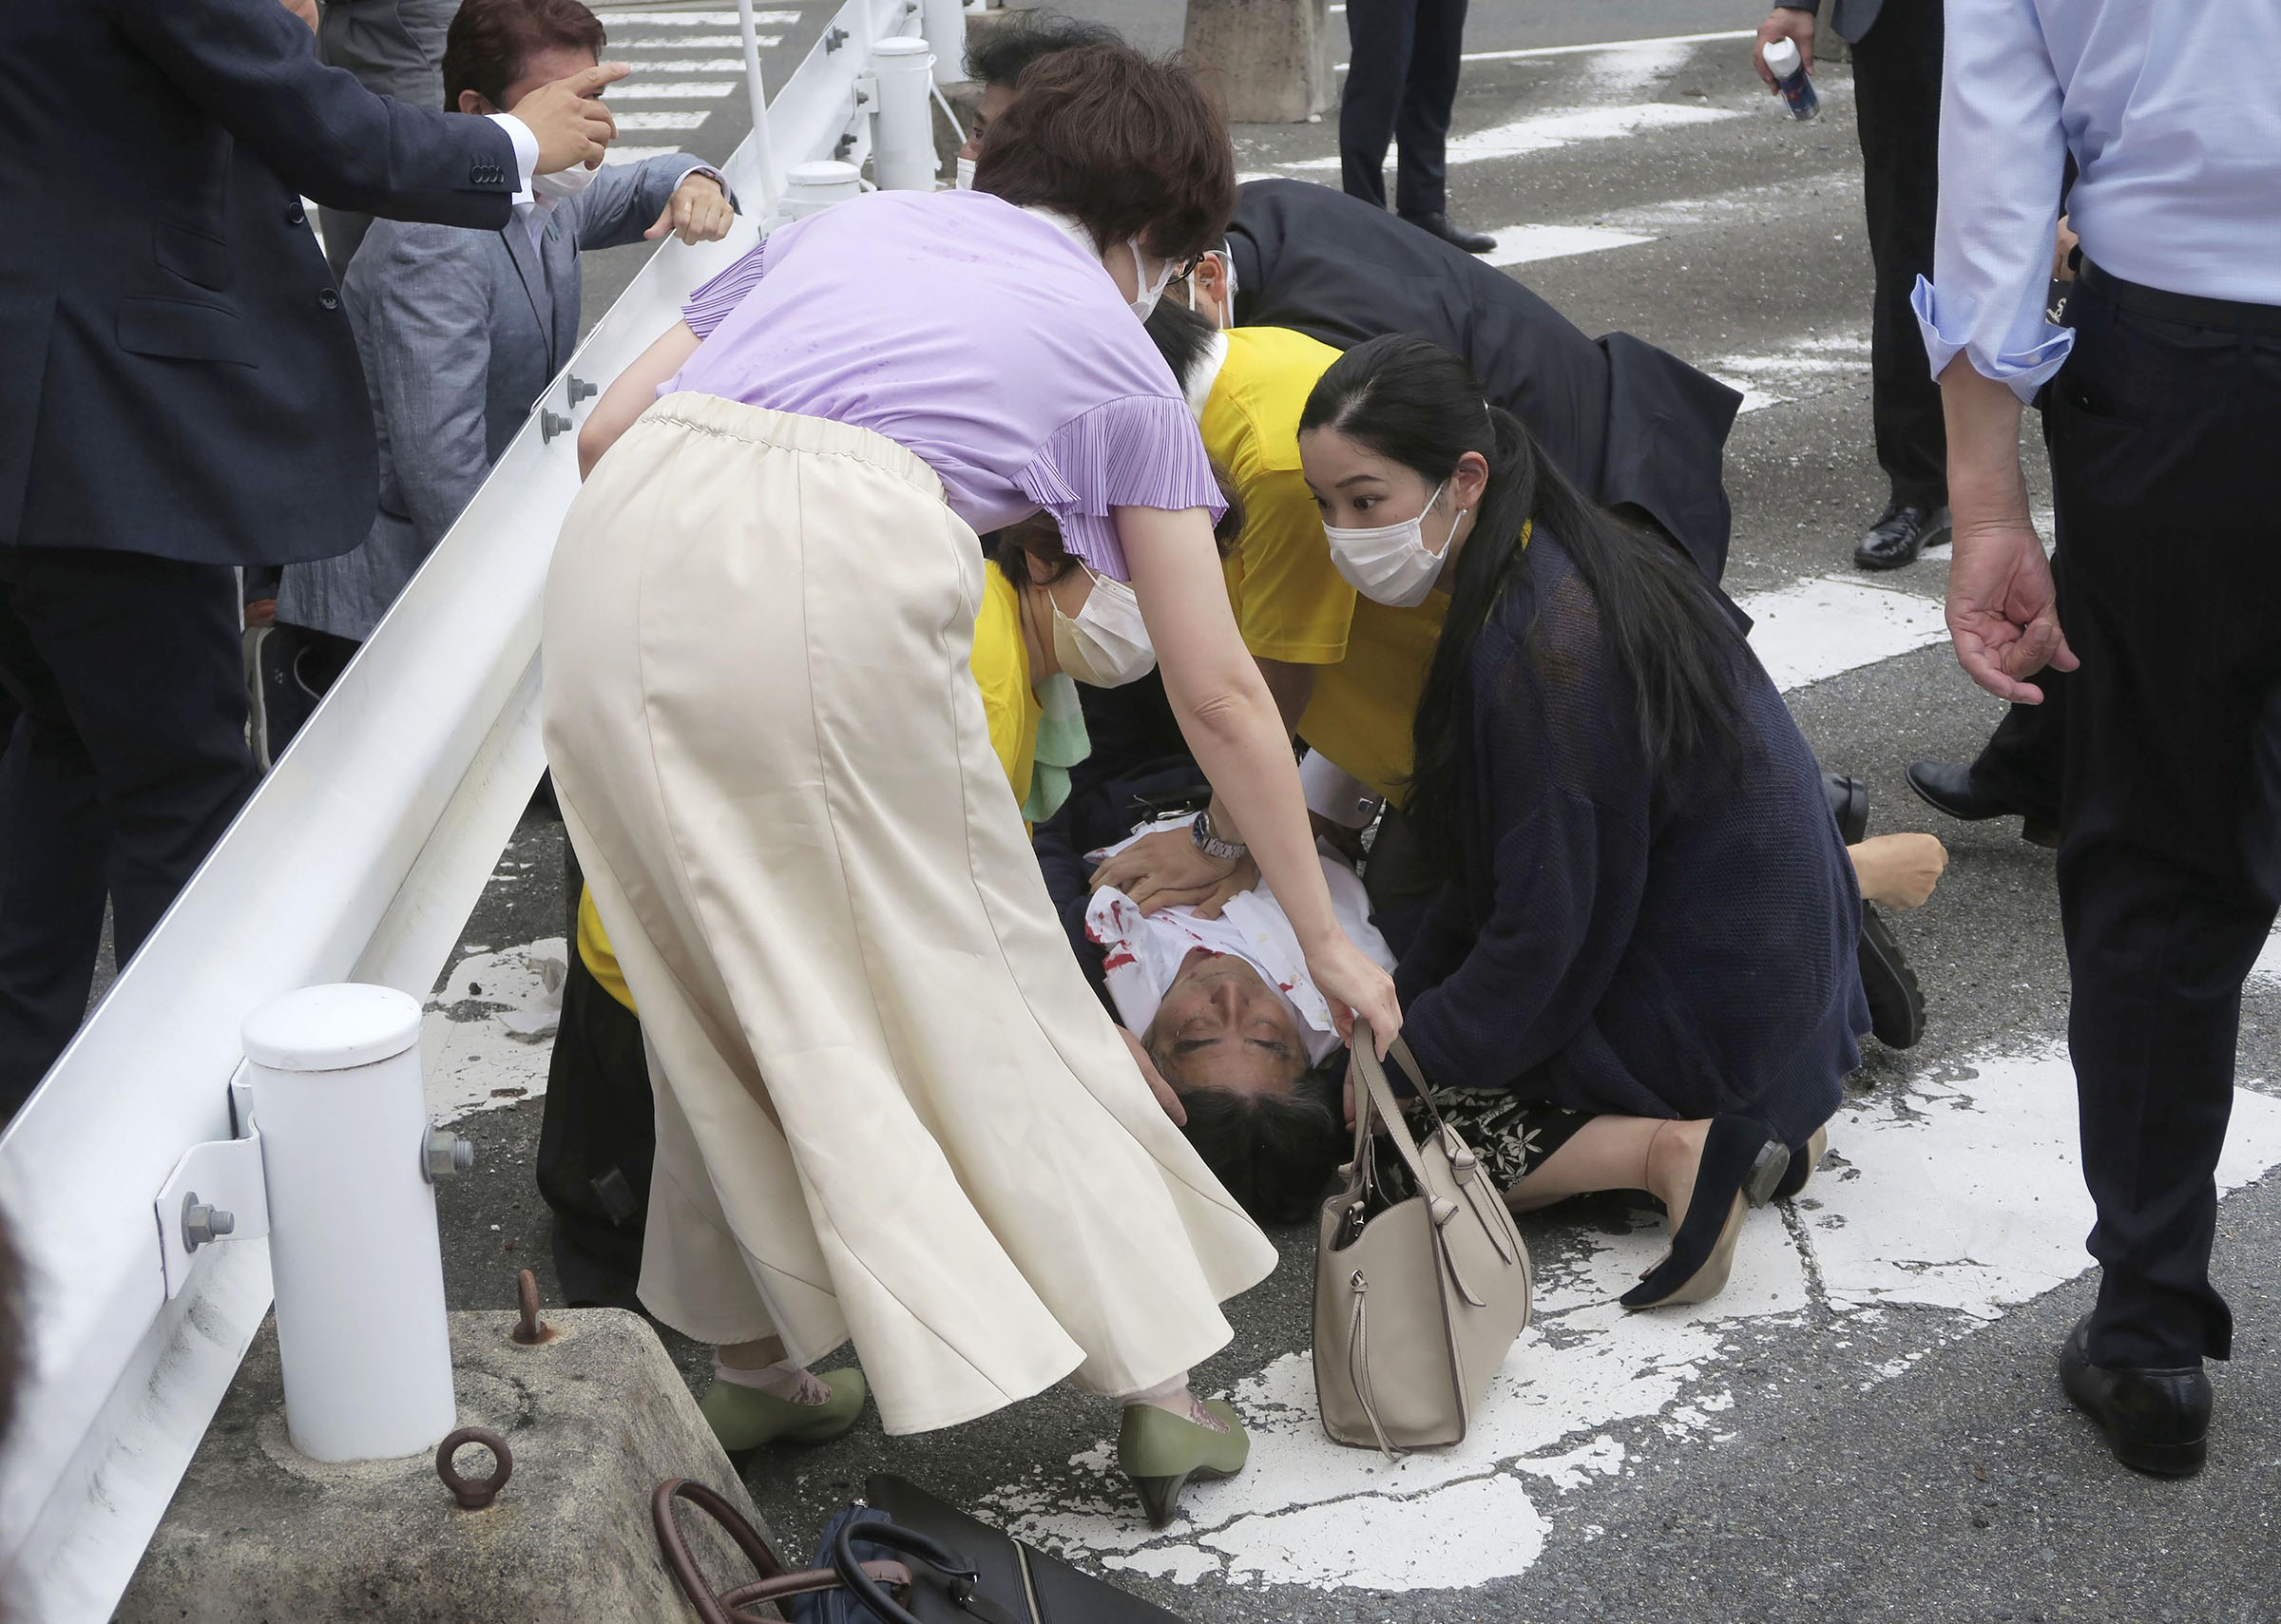 Japan’s former Prime Minister Shinzo Abe, center, falls on the ground after being shot in Nara, western Japan Friday, July 8, 2022. (Kyodo News/AP)